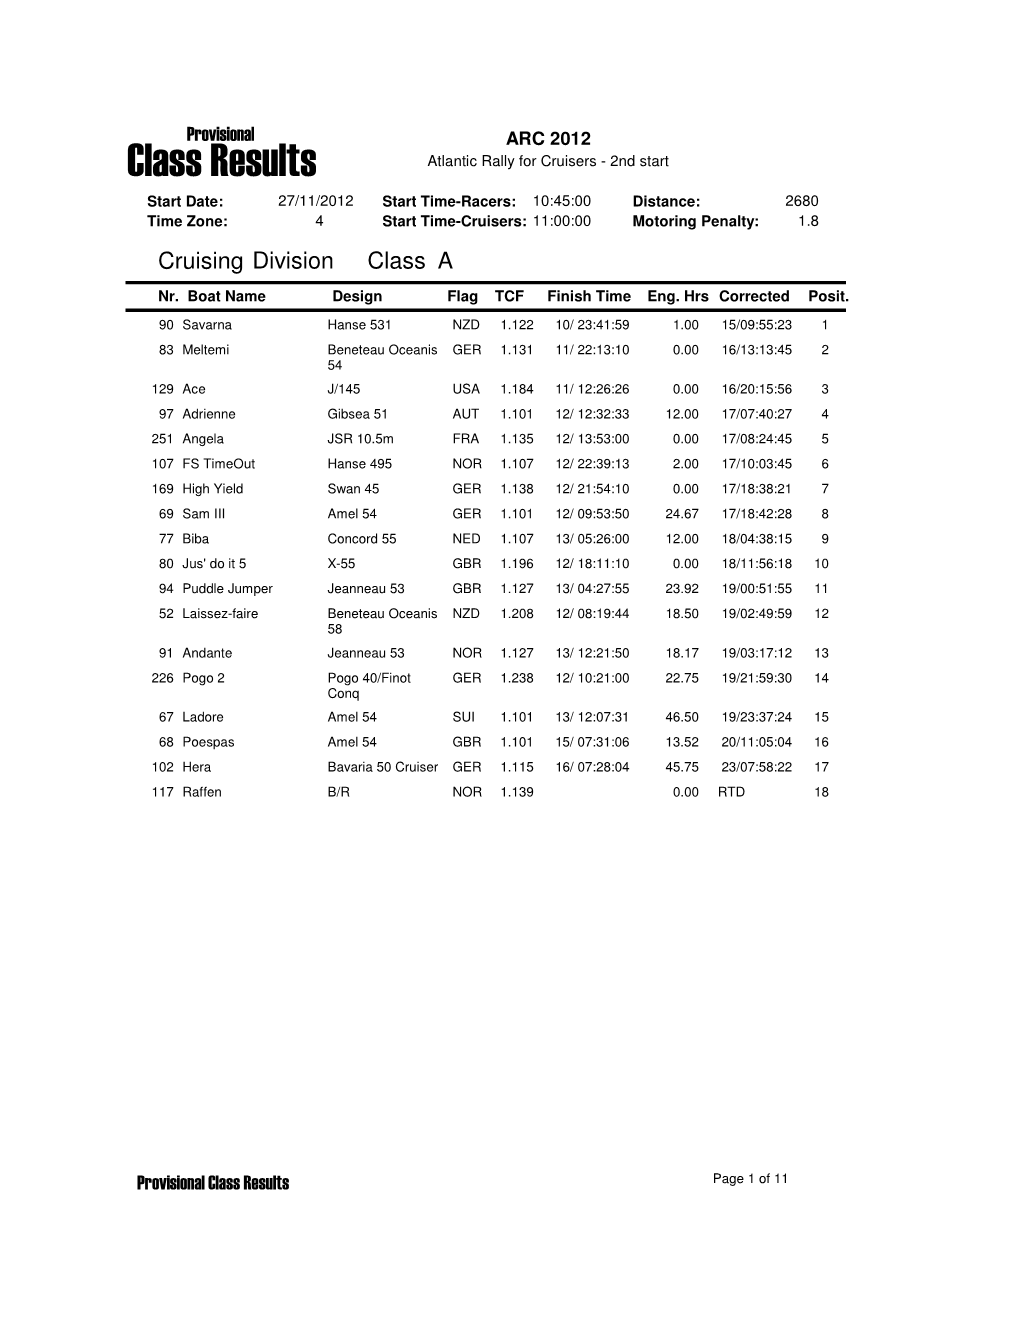 Results by Class